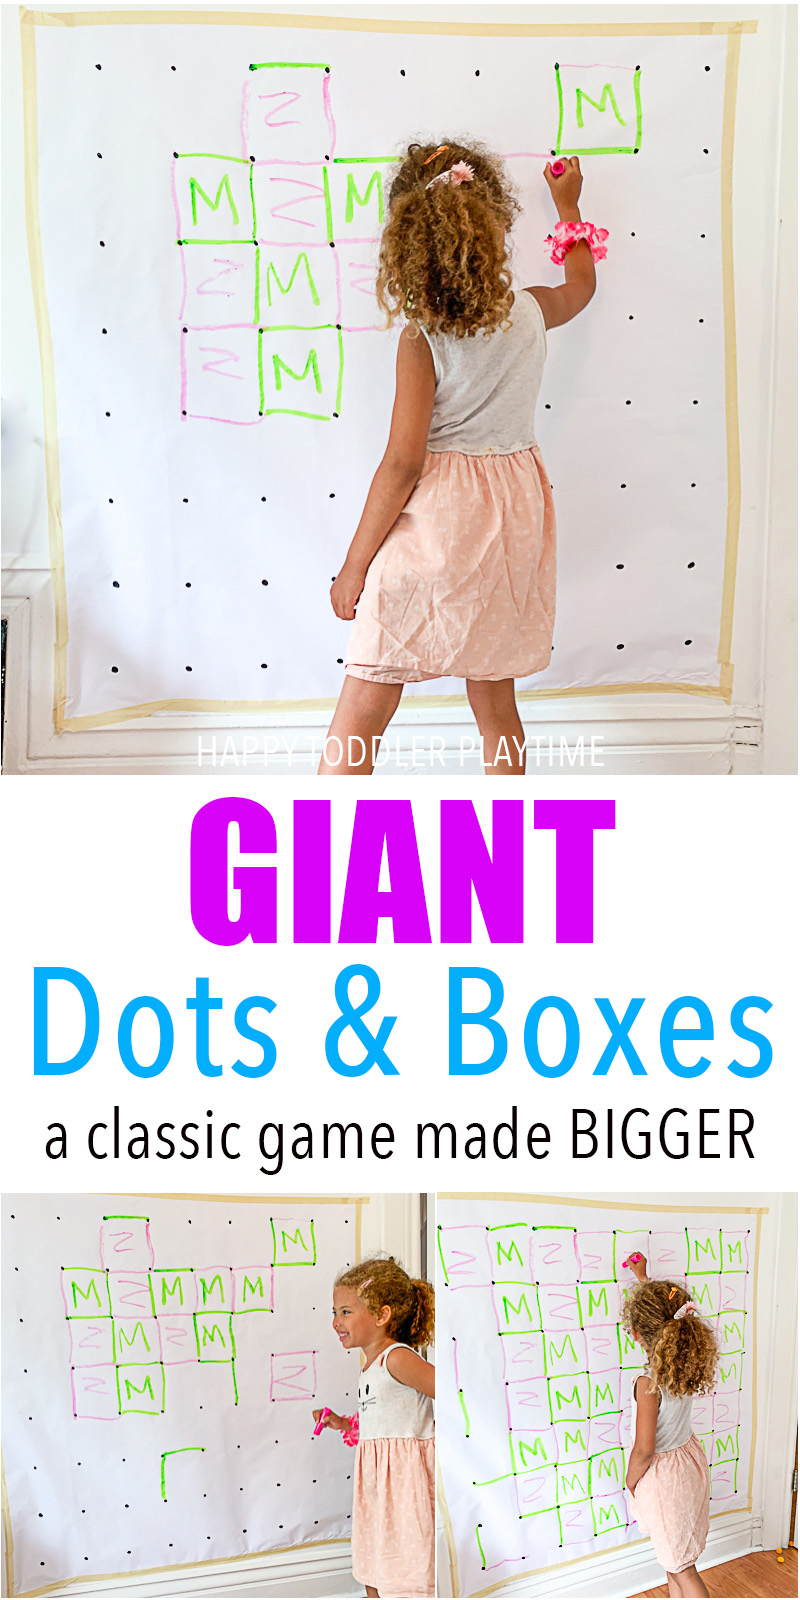 GIANT Dots & Boxes